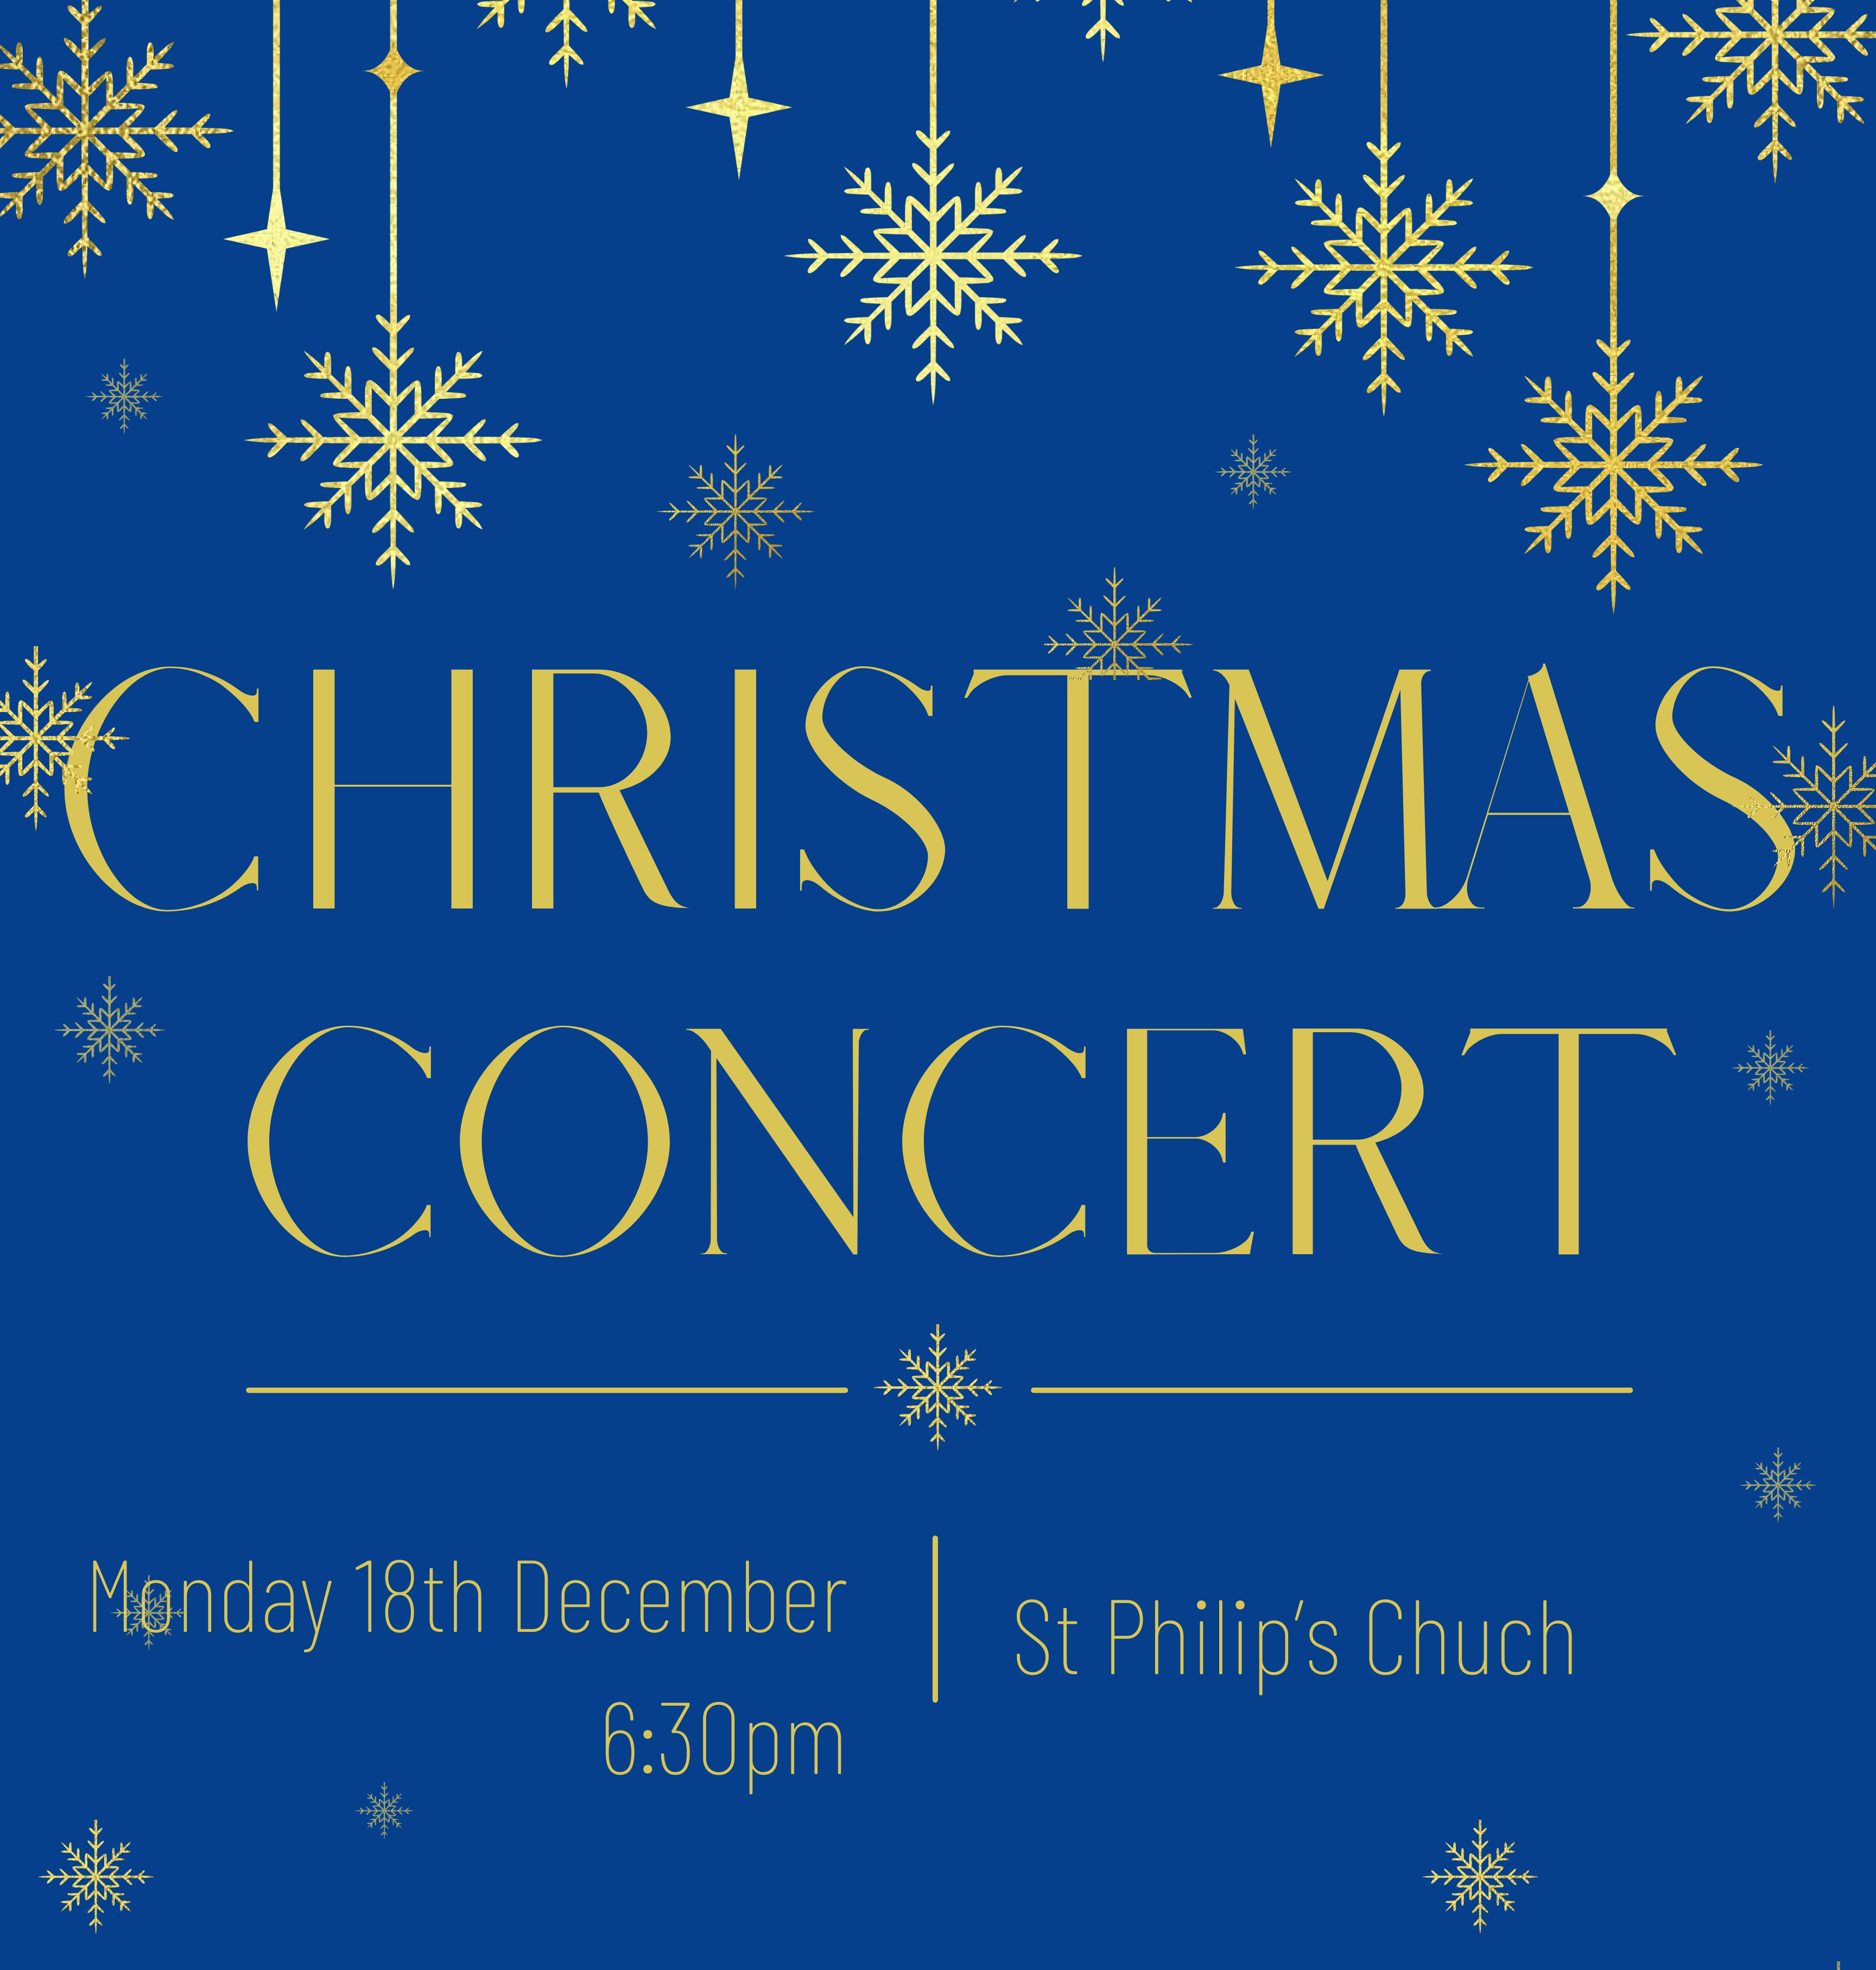 Kingsdown’s Christmas Concert will take place on Monday 18th December at 6:30pm in St Philip’s Church, Beechcroft Road. All are welcome to enjoy this event. #kdsTeam